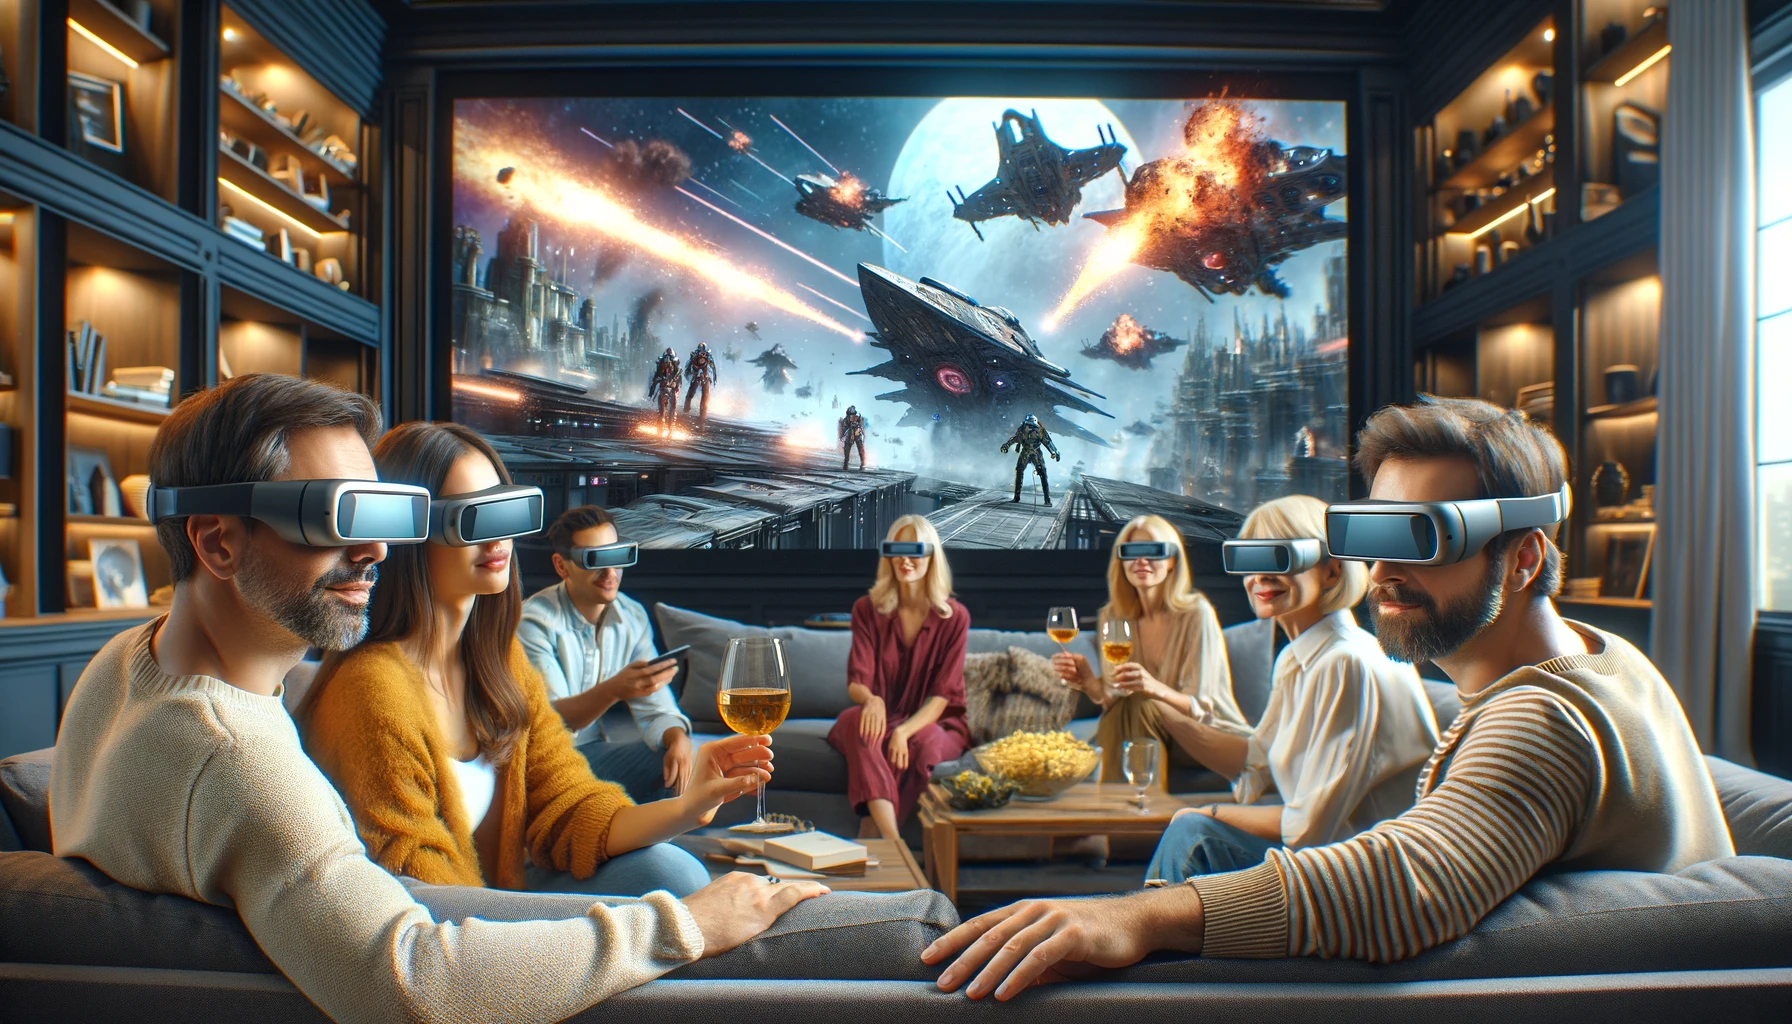 A group of friends experiencing an augmented reality movie in a home theater environment. The AR technology superimposes scenes from the movie into their living space, creating an interactive cinema experience with elements such as spaceships and alien creatures appearing around them.